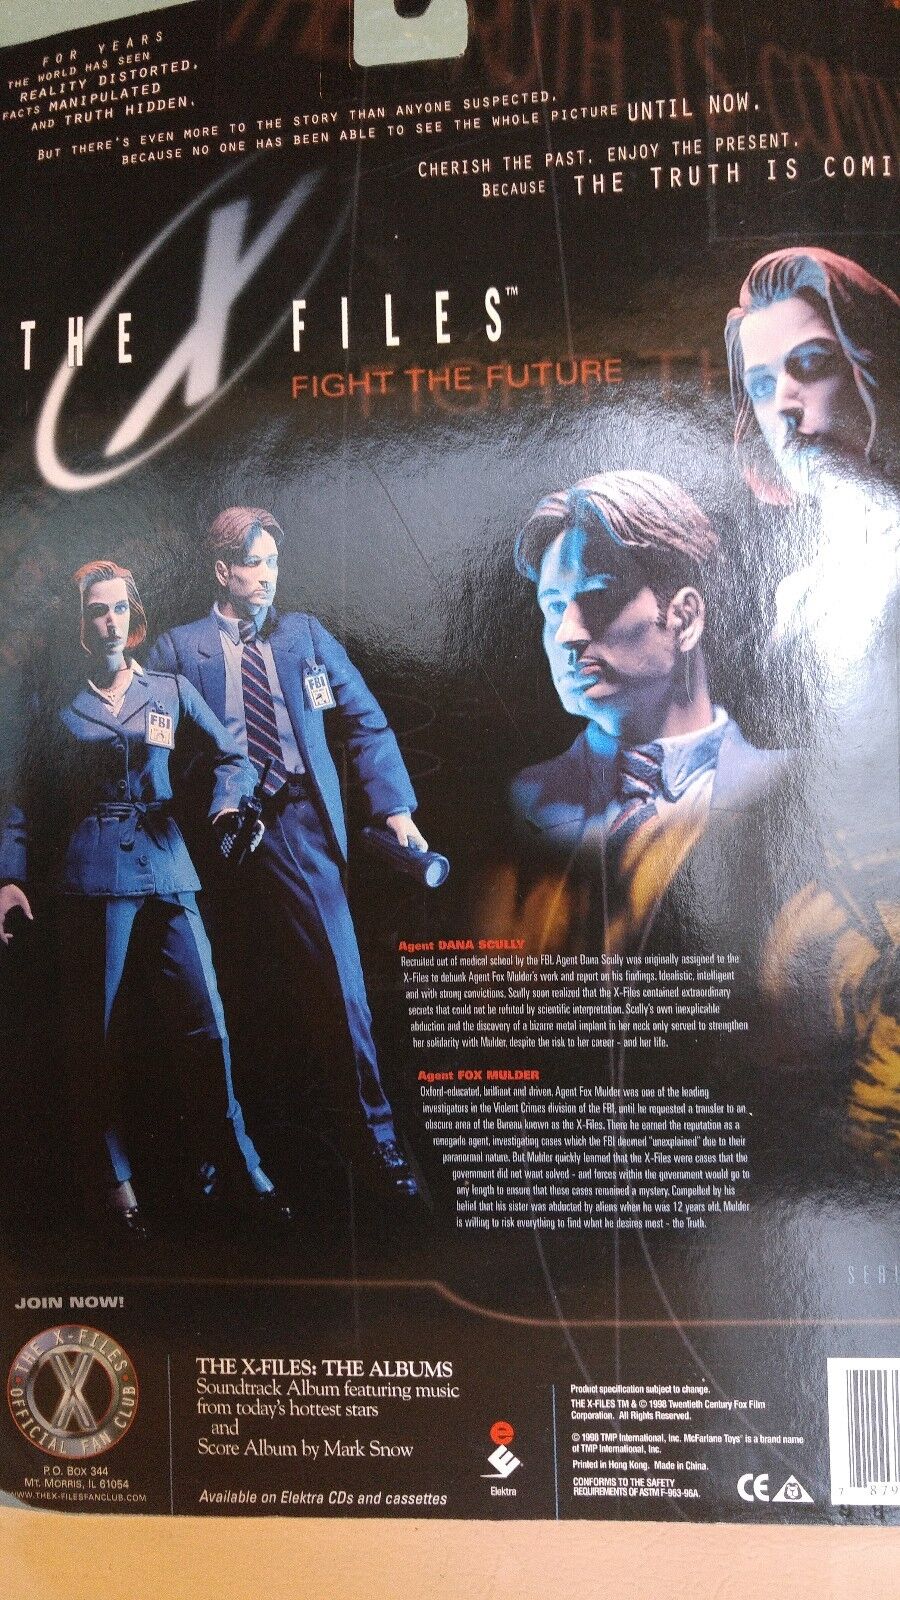 1998 McFarlane Toys The X-Files Series 1 Agent Fox Mulder and Agent Dana Scully Без бренда - фотография #5